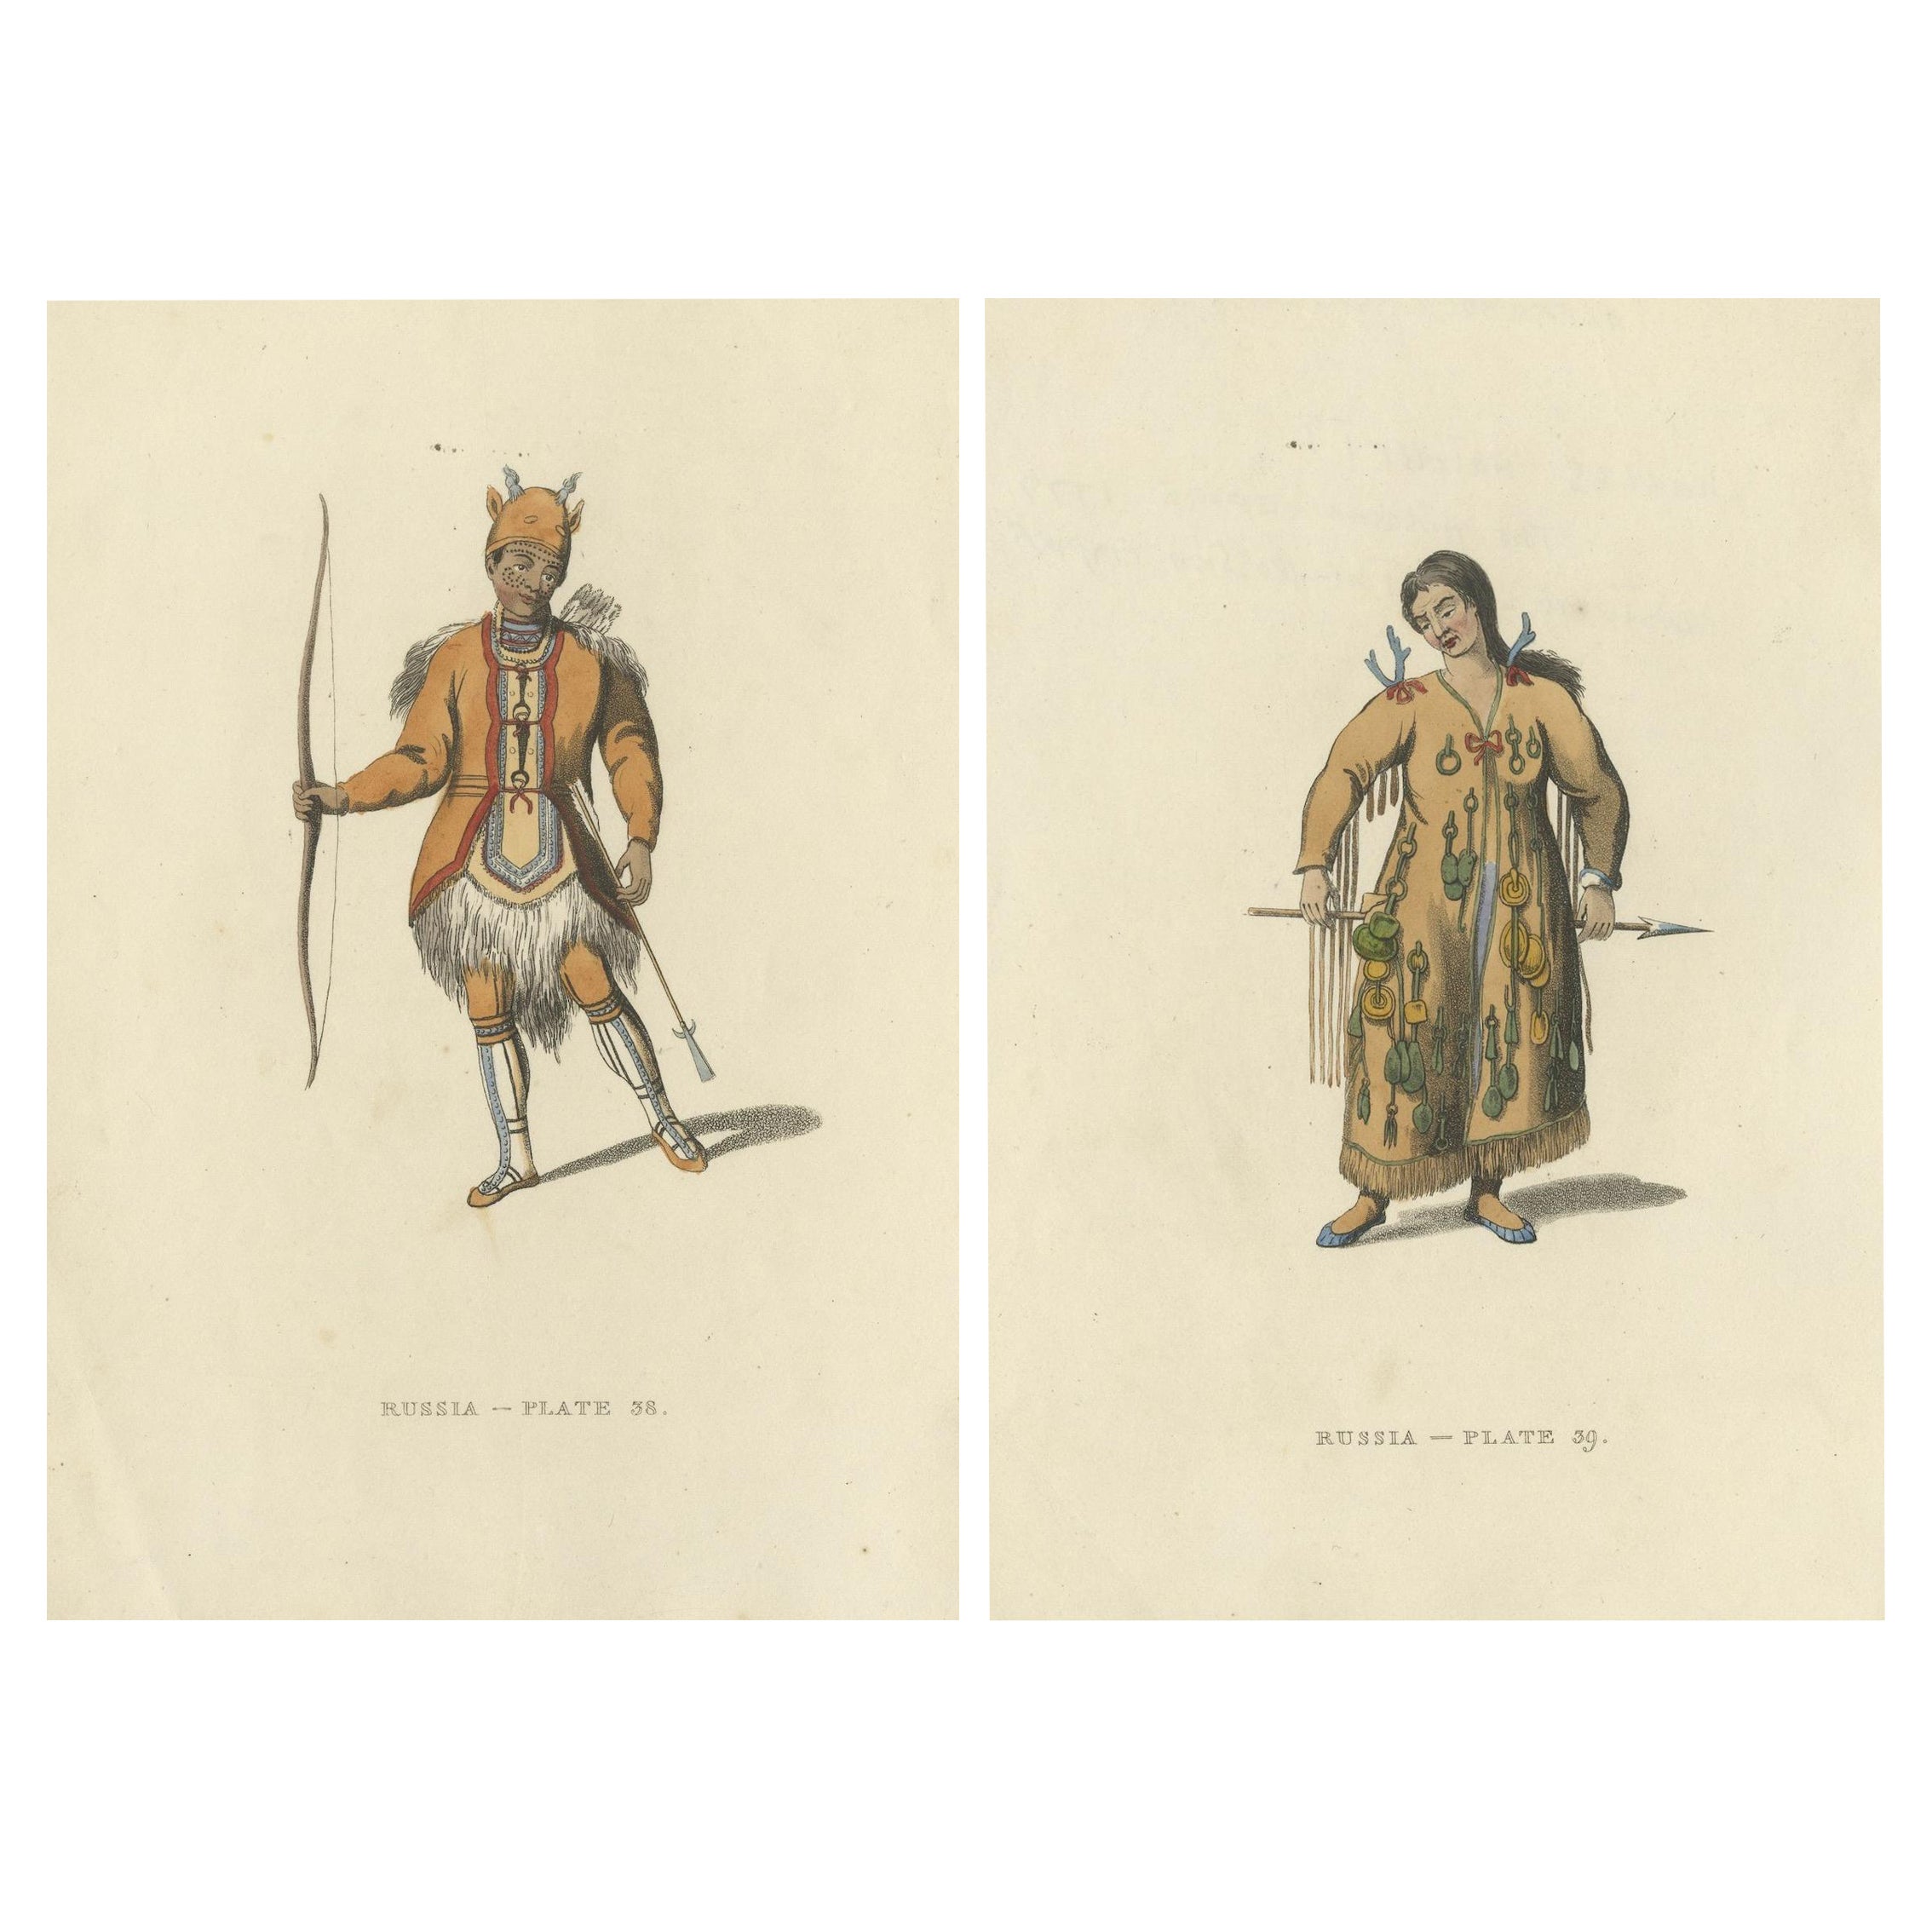 Siberian Traditions: The Tungoose Hunter and Tungoosi Shaman, Published in 1814 For Sale